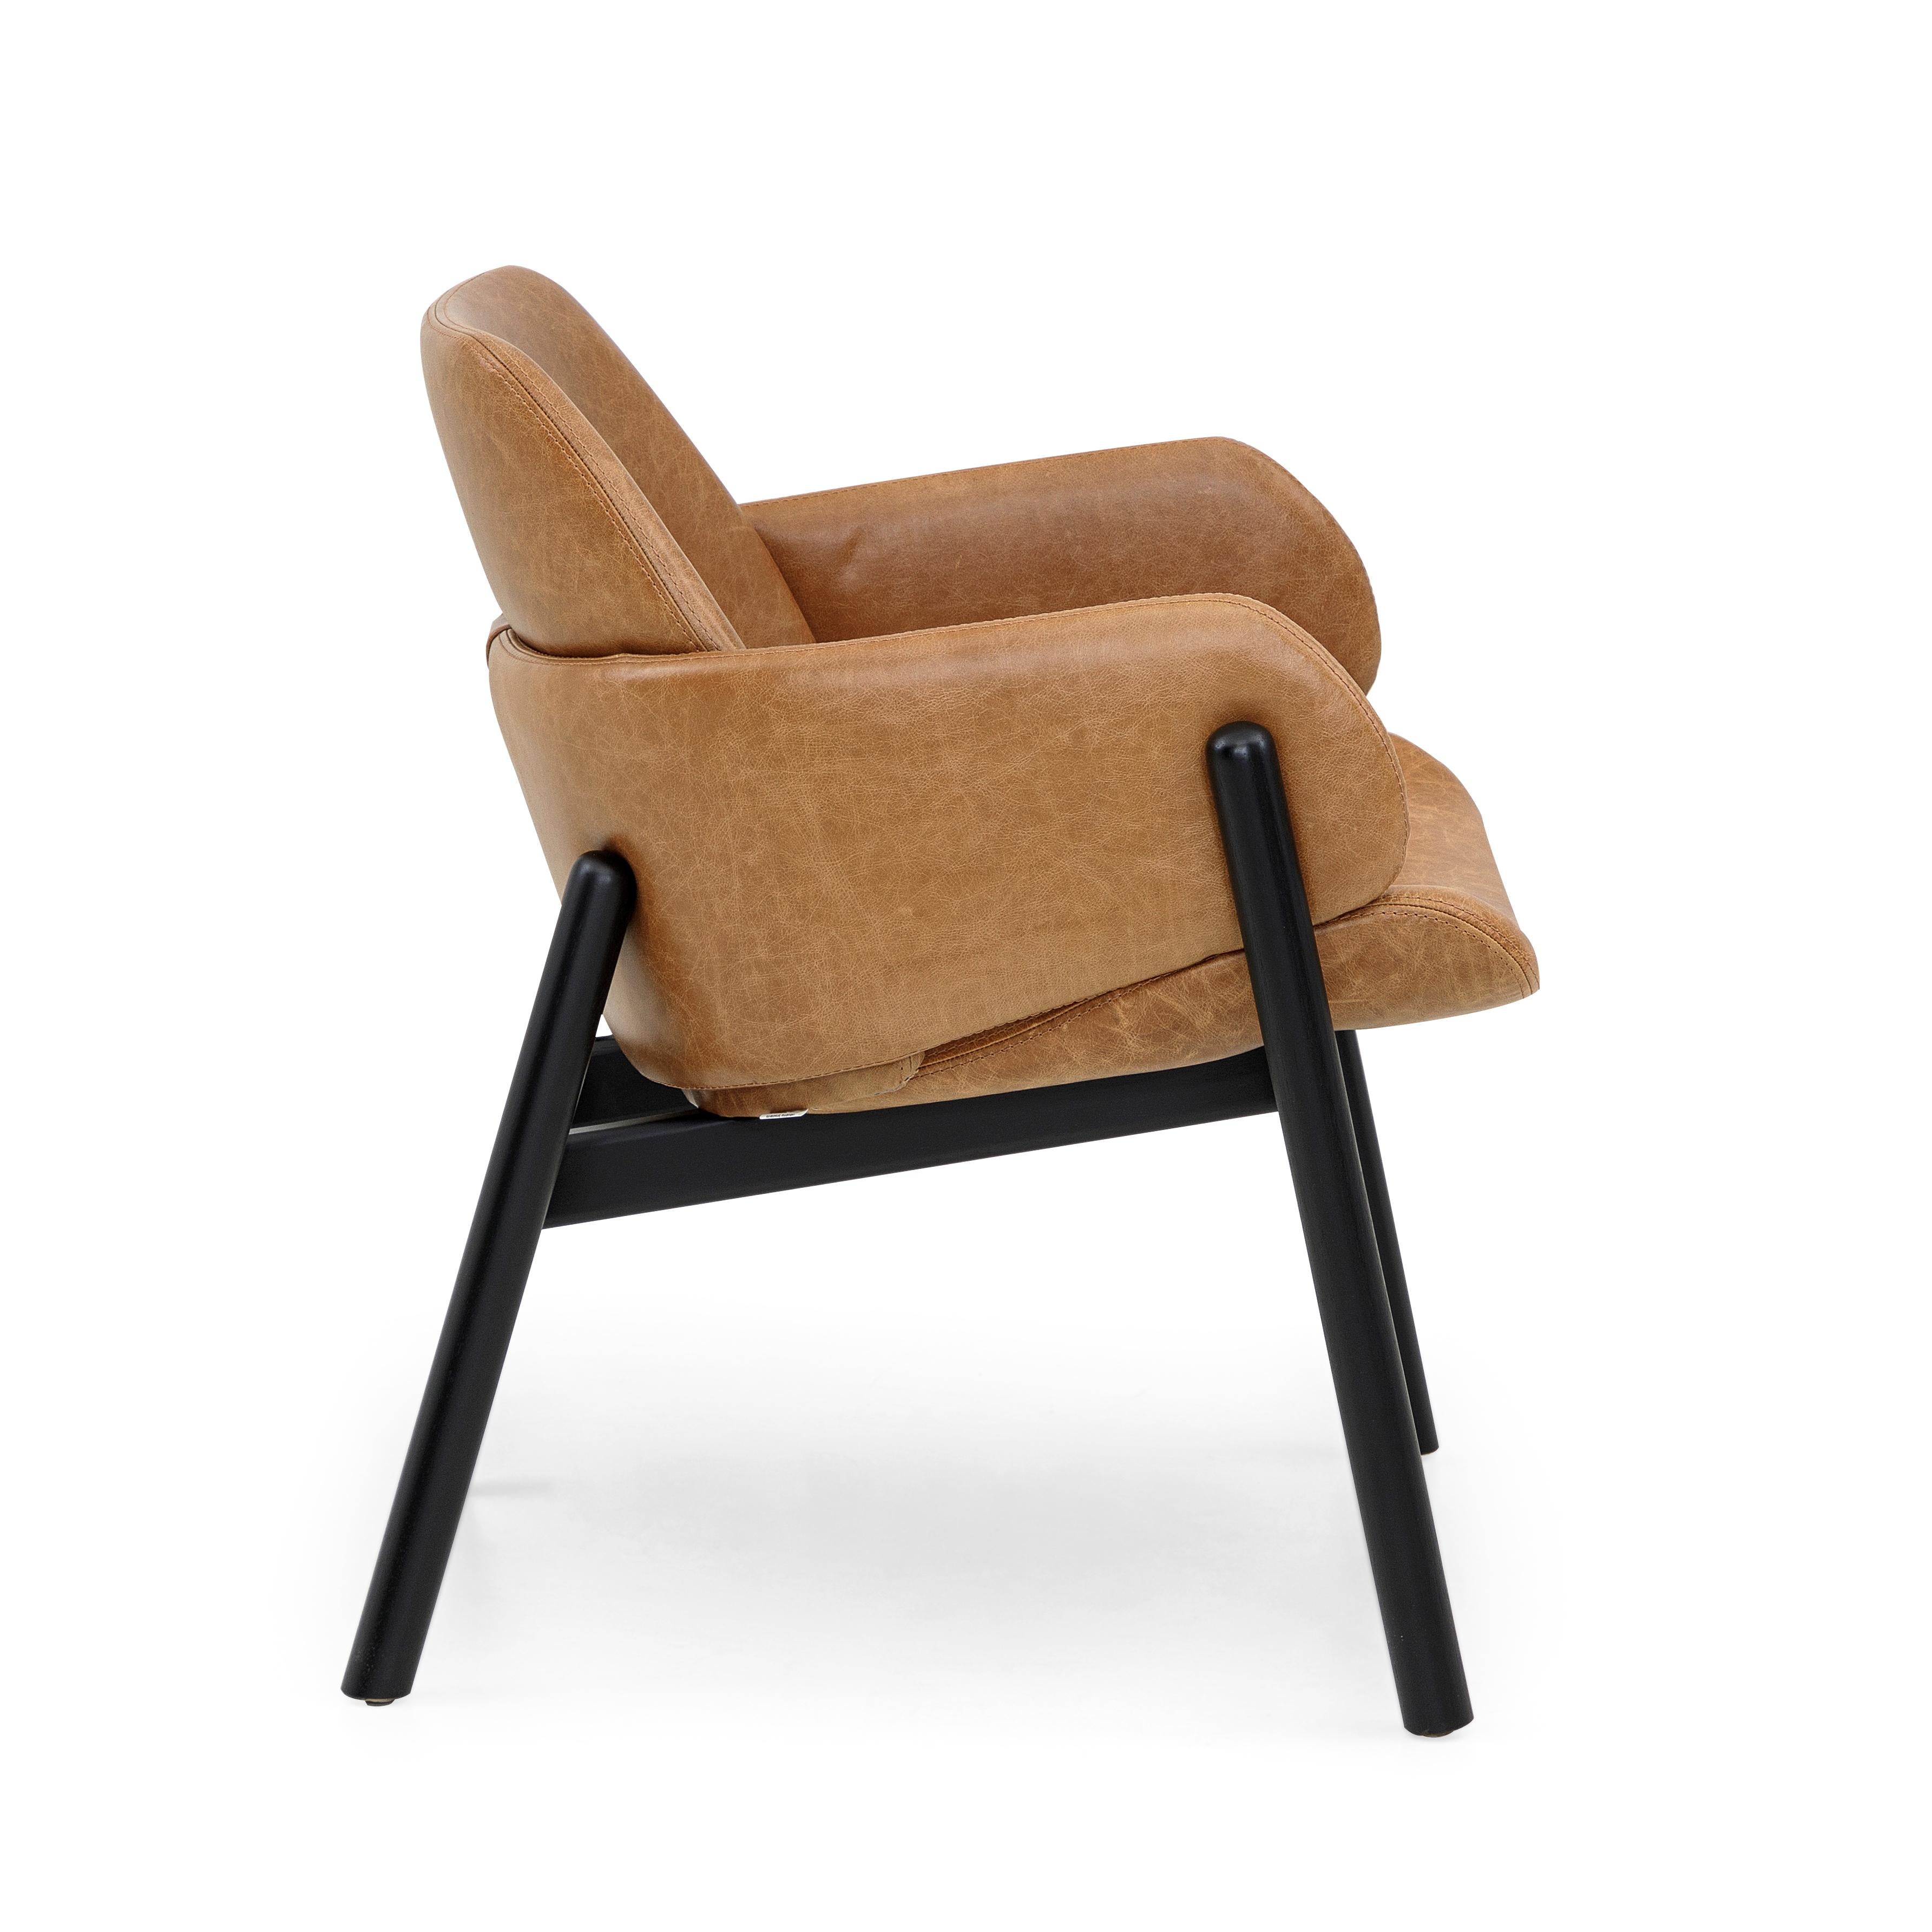 The above chair goes above and beyond in terms of design and comfortability. The combination of the brown leather and the black painted frame allows you to mix the Above chair in rooms already established and rooms of the new design. The seat, back,